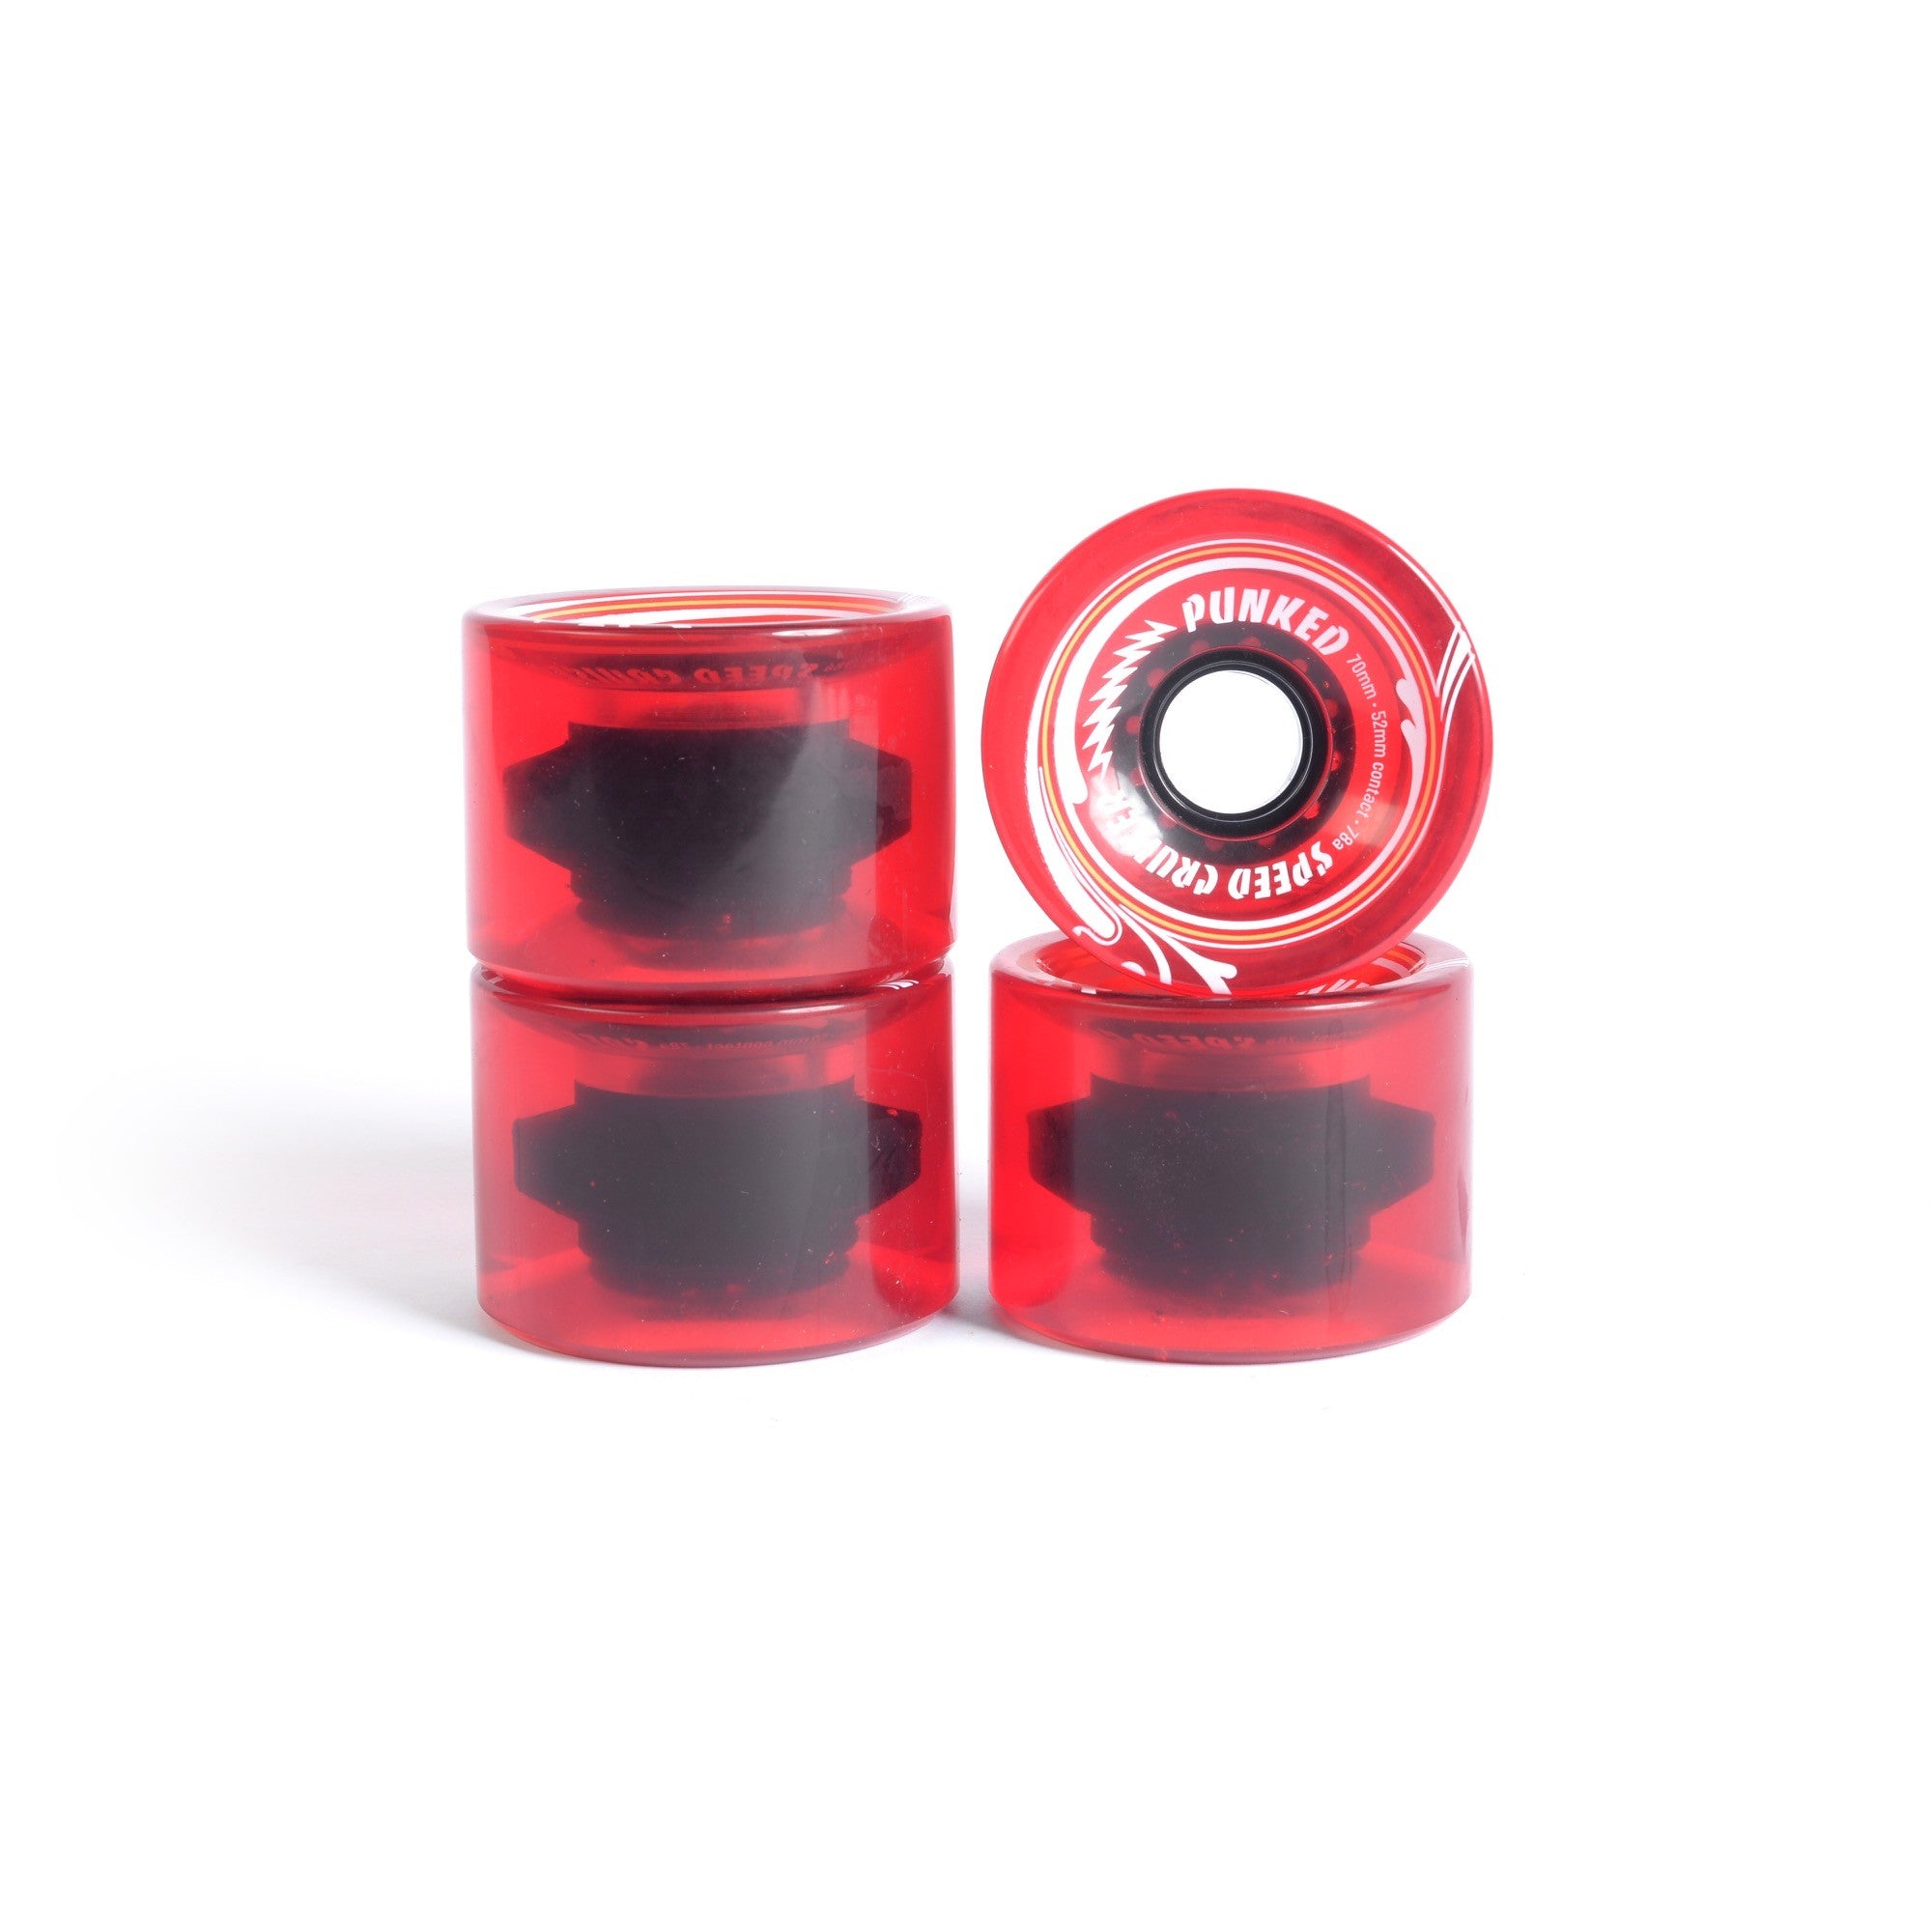 Roues skateboard - YOCAHER 70x52mm 78a - Translucid Red